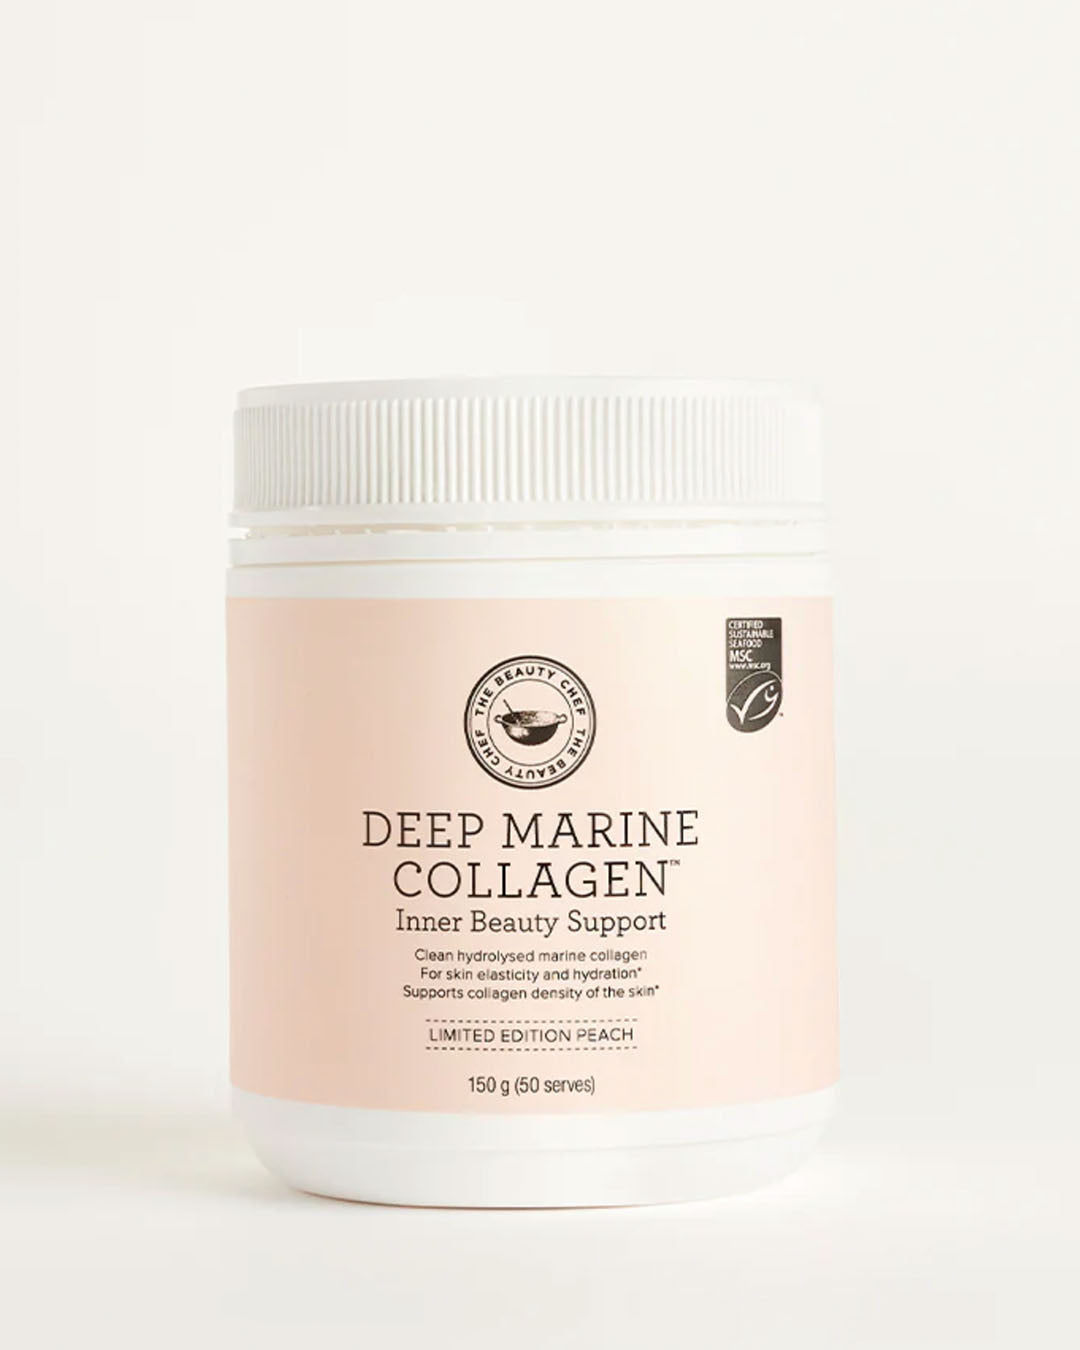 Deep Marine Collagen Inner Beauty Support - Peach Supplements by The Beauty Chef - Prae Store